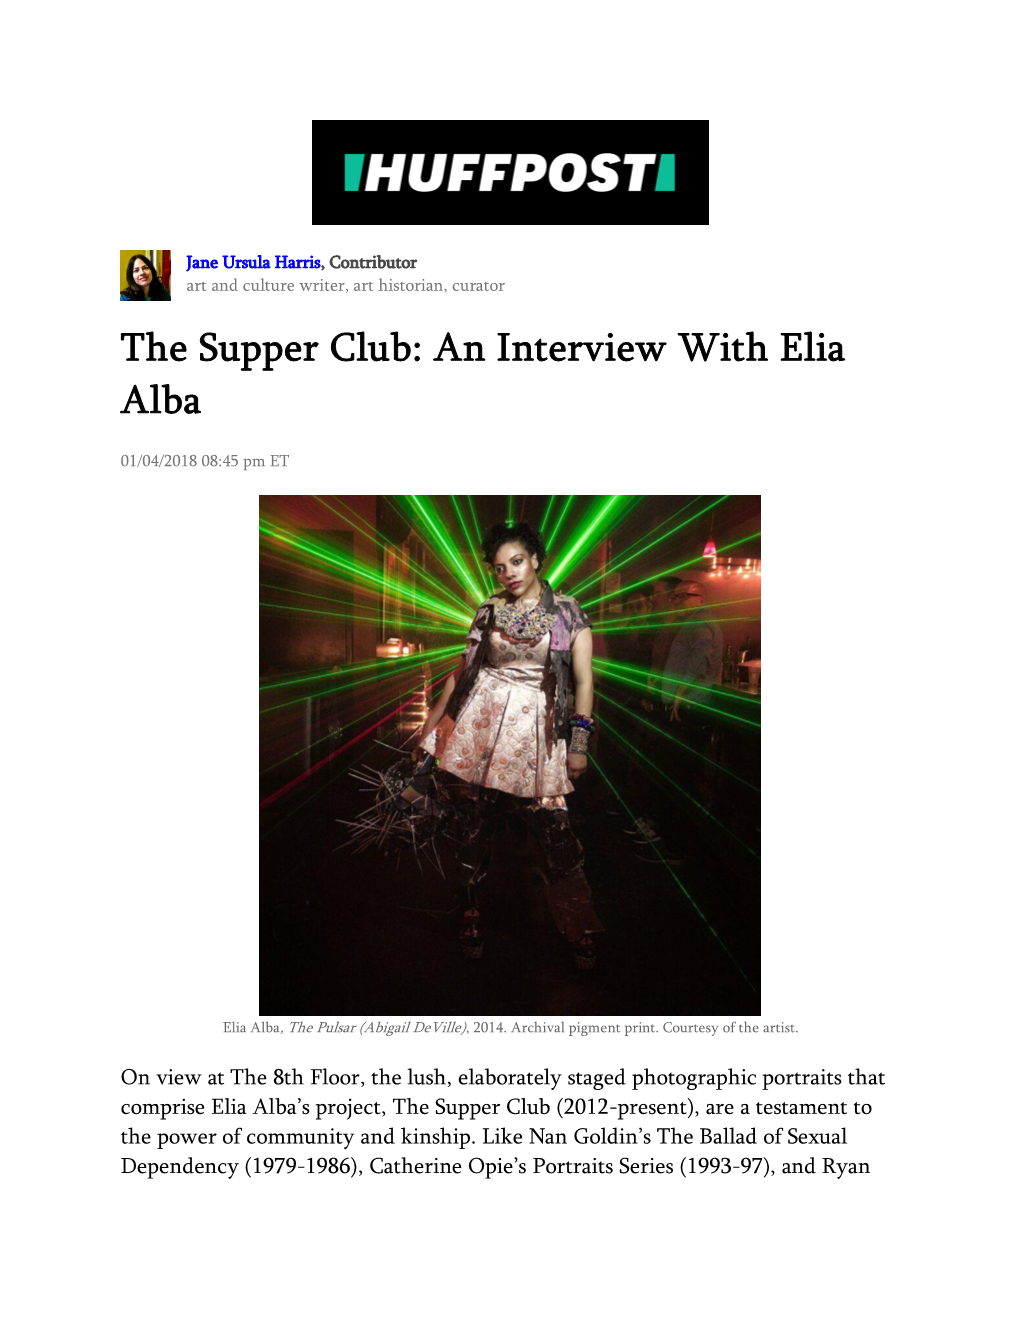 The Supper Club: an Interview with Elia Alba